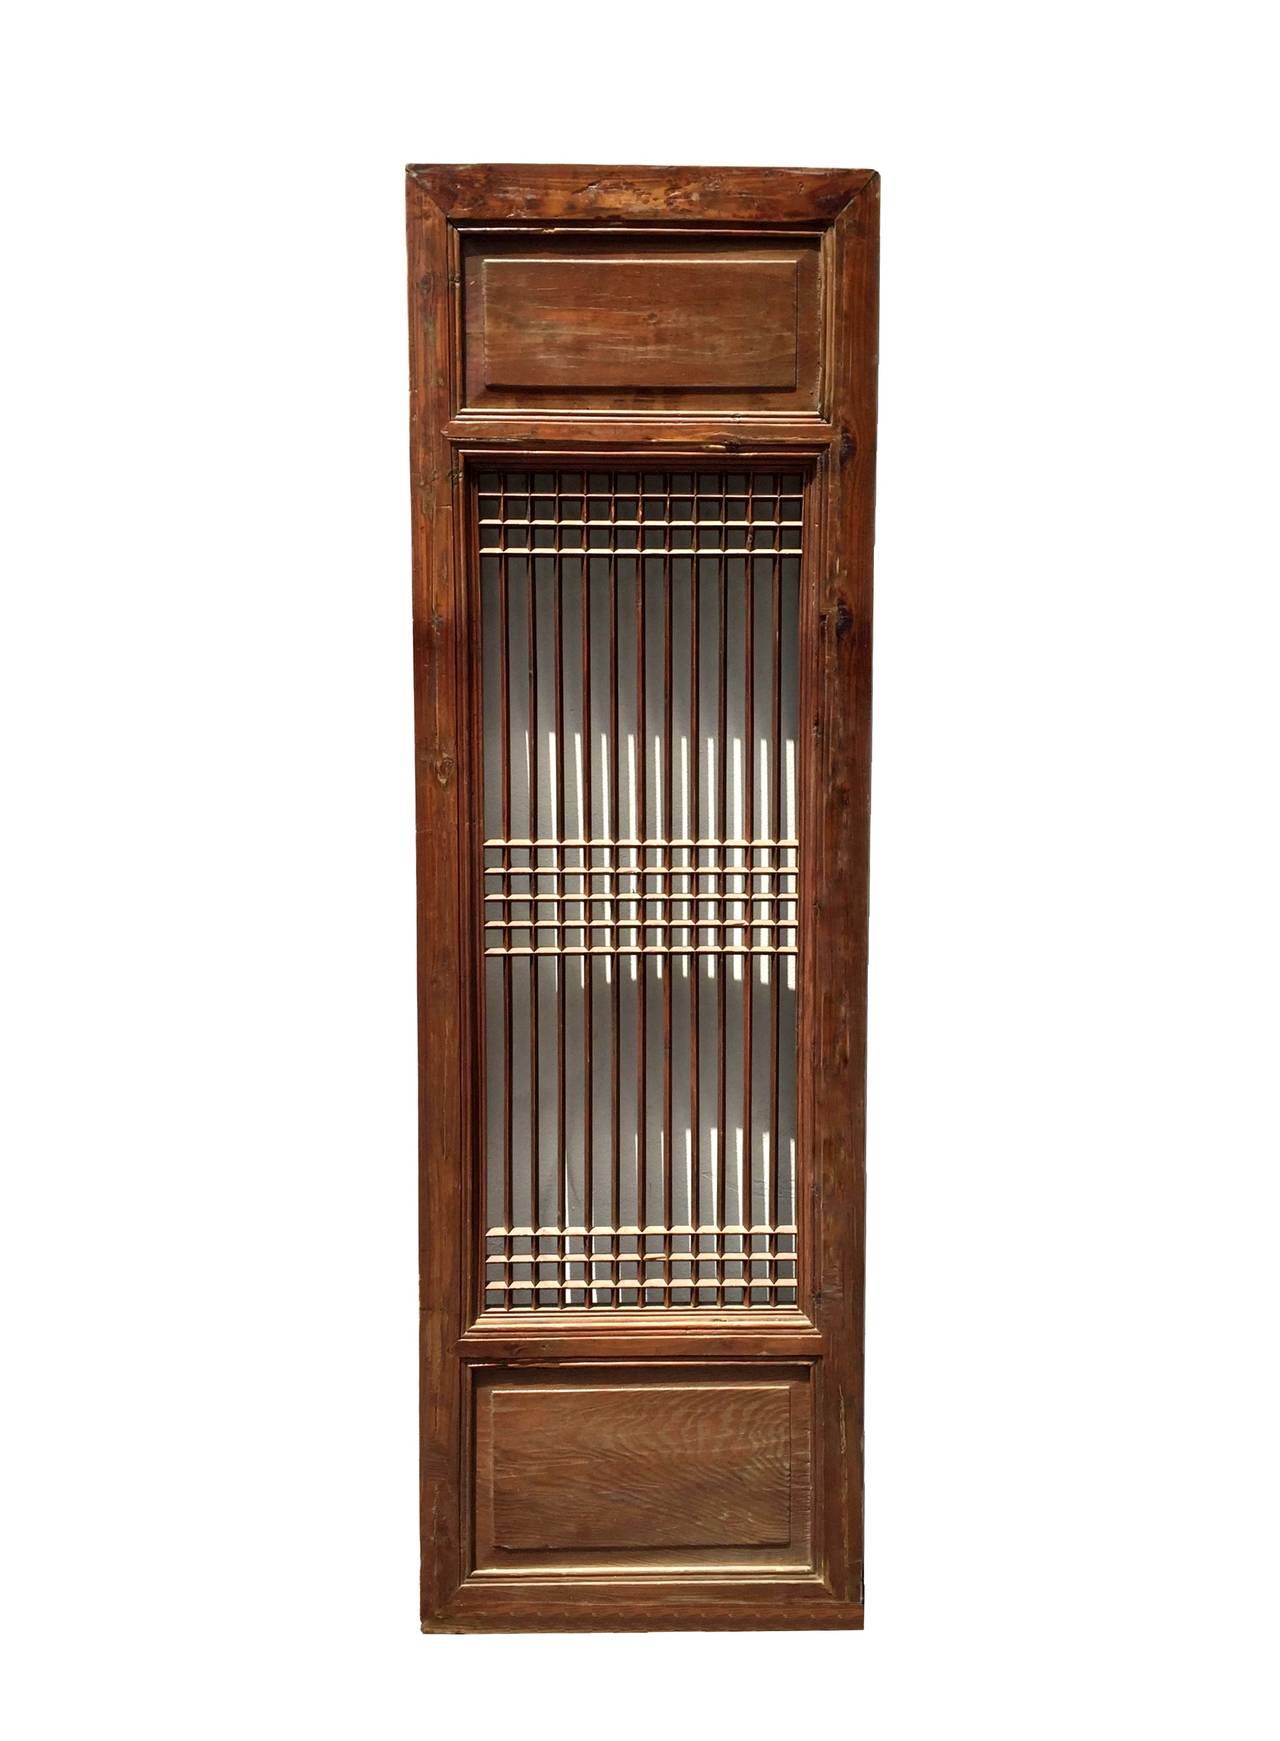 These beautiful window screens are wonderful examples of Ming Dynasty's simple elegant style of home furnishing. Lines are formed painstakingly by hand via the traditional joinery method of tenons and mortises. Unlike the common block bars, these